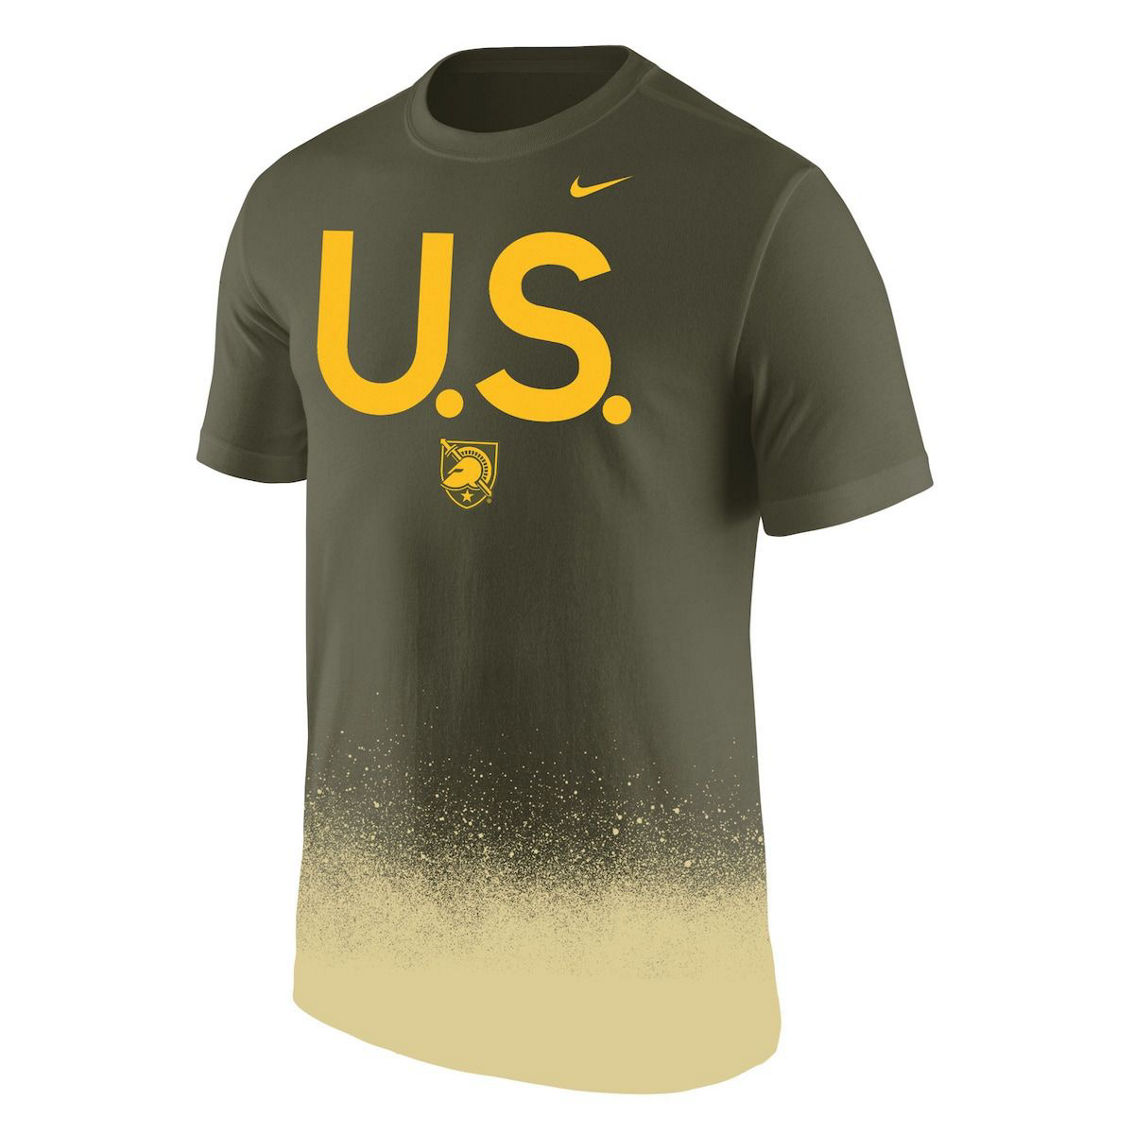 Nike Men's Olive Army Black Knights 1st Armored Division Old Ironsides Rivalry Splatter T-Shirt - Image 3 of 4